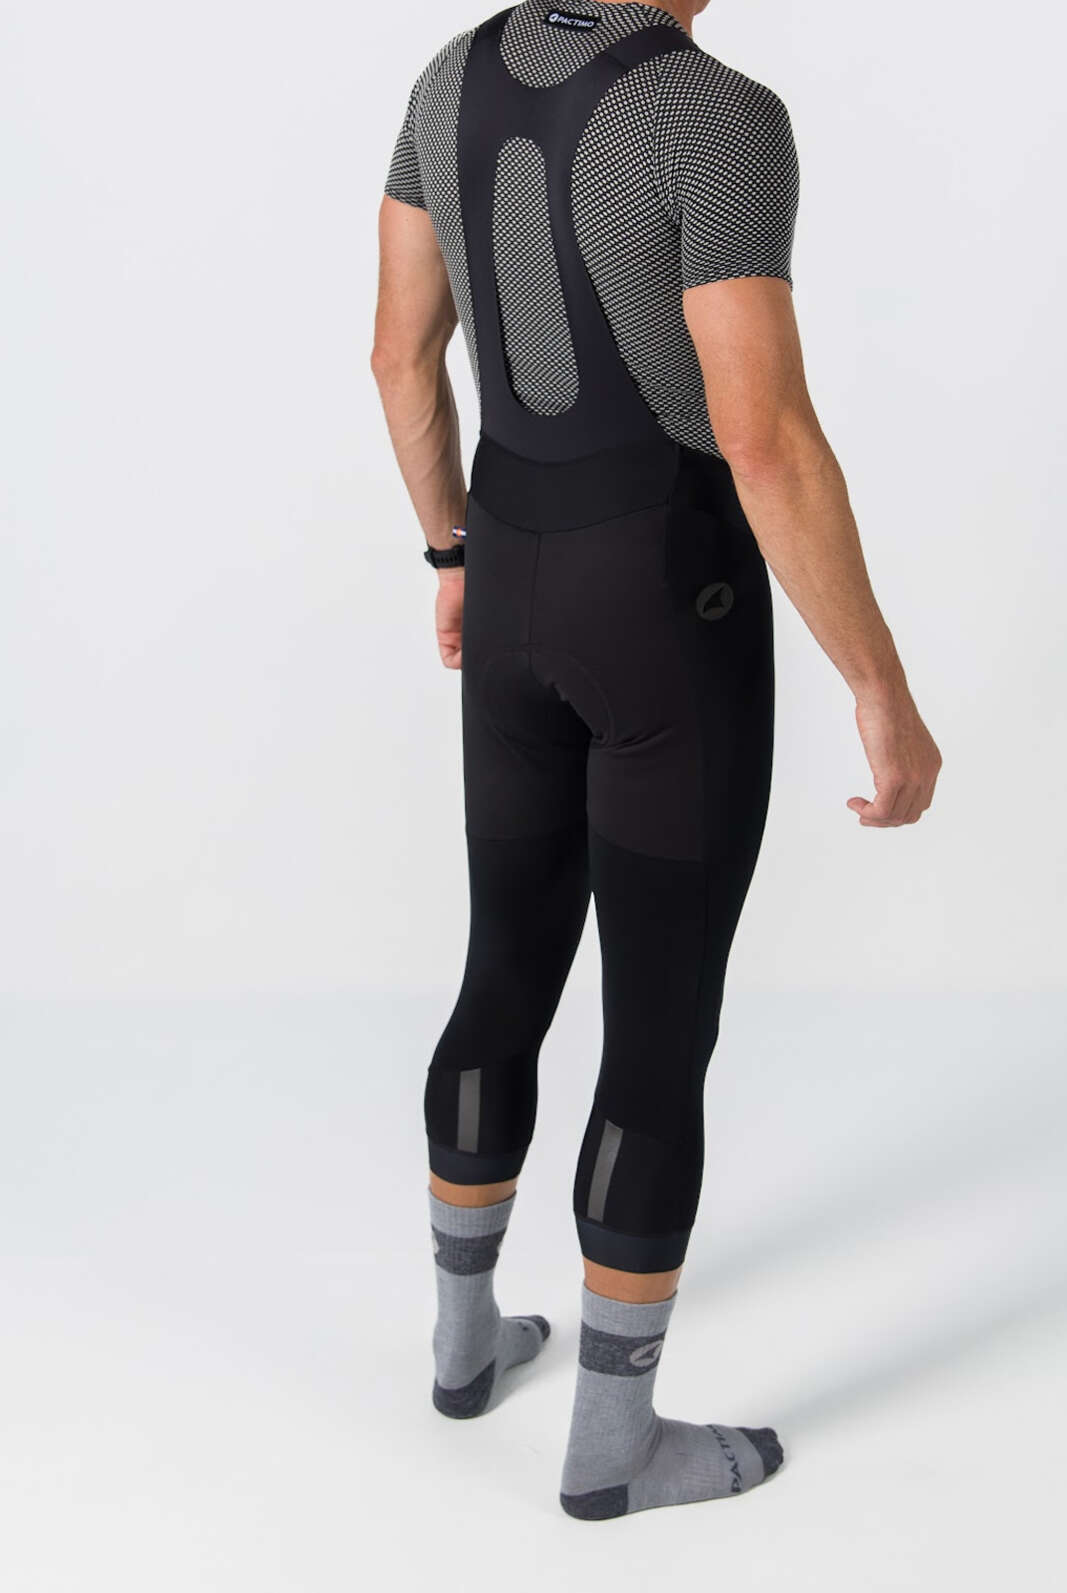 Men's Water-Repelling 3/4 Thermal Cycling Bib Tights - On Body Back View